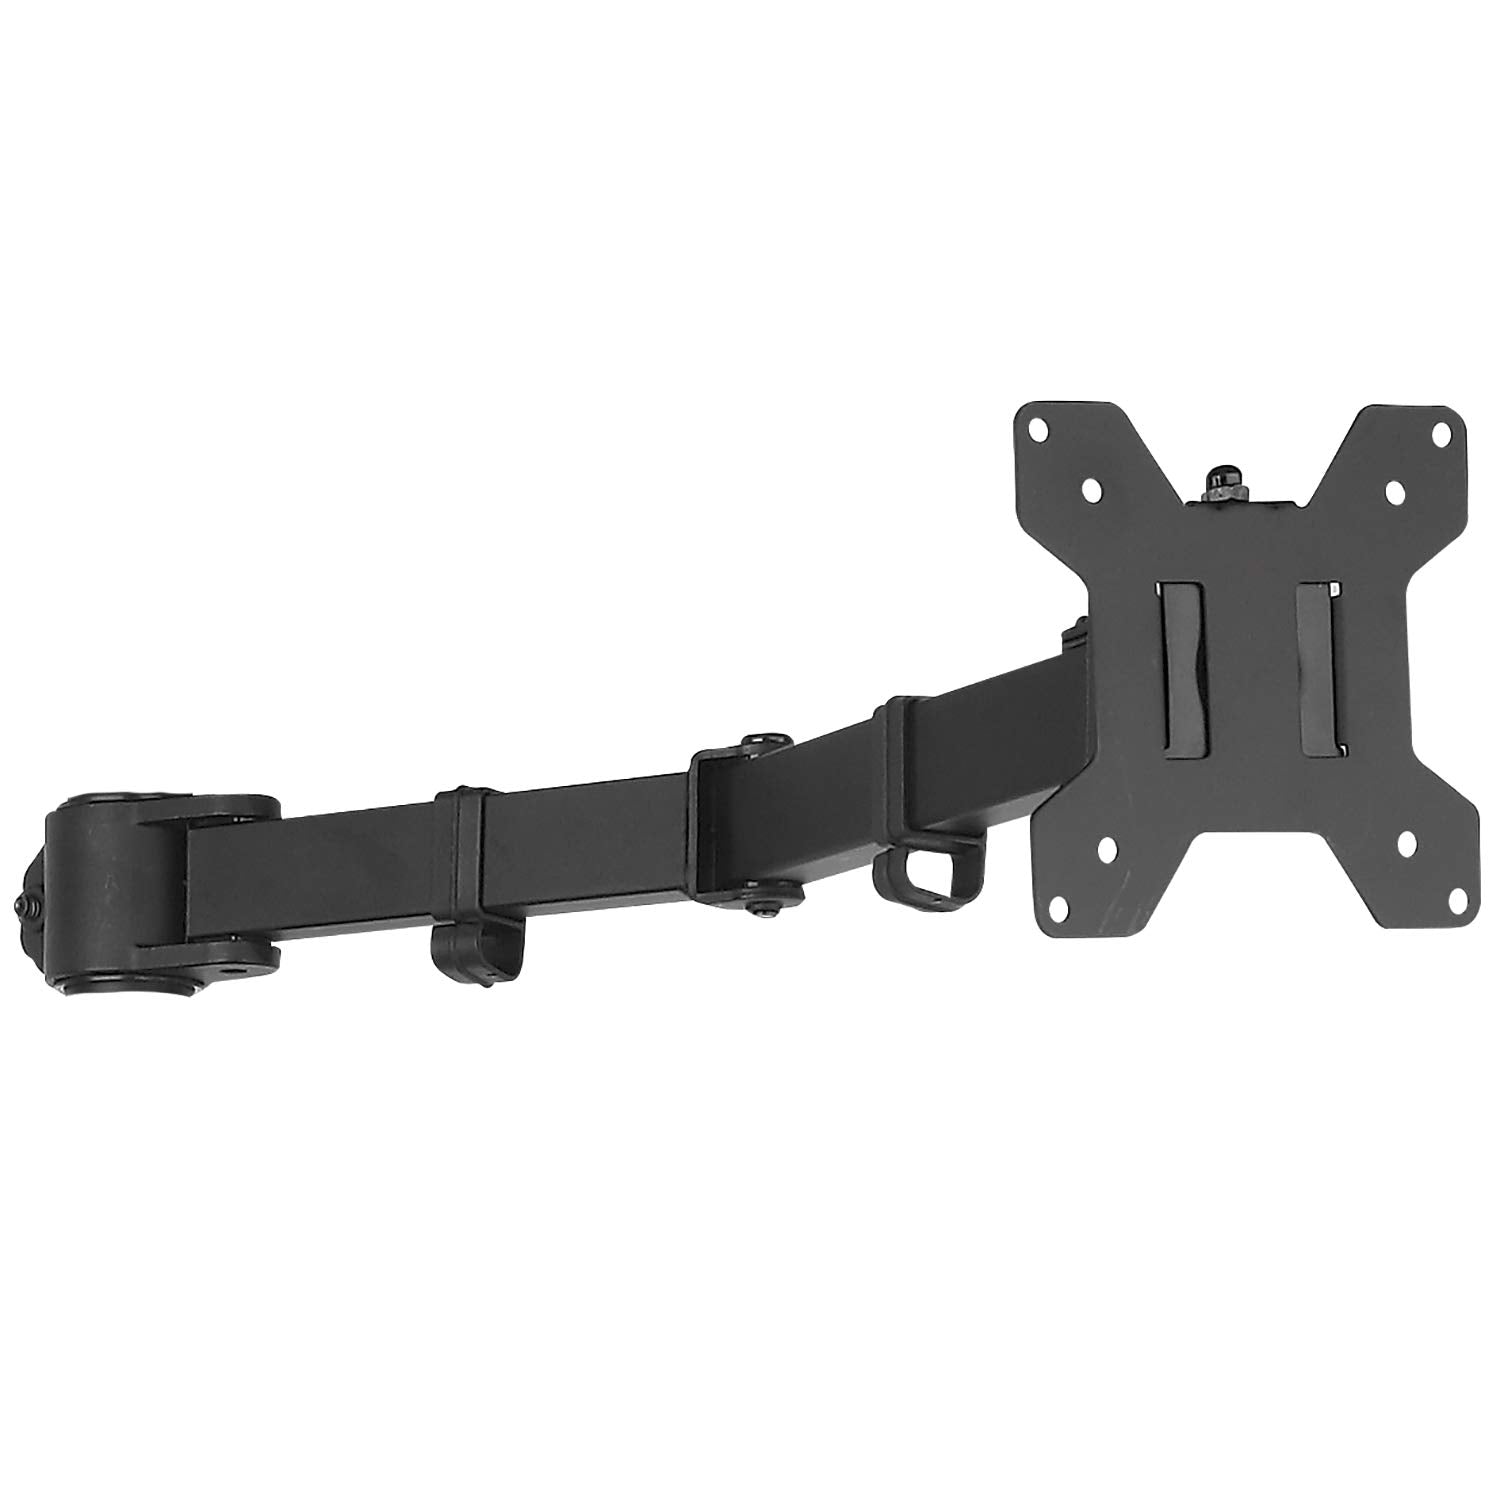 Single Fully Adjustable Arm for WALI 001ARM - WALI ELECTRIC